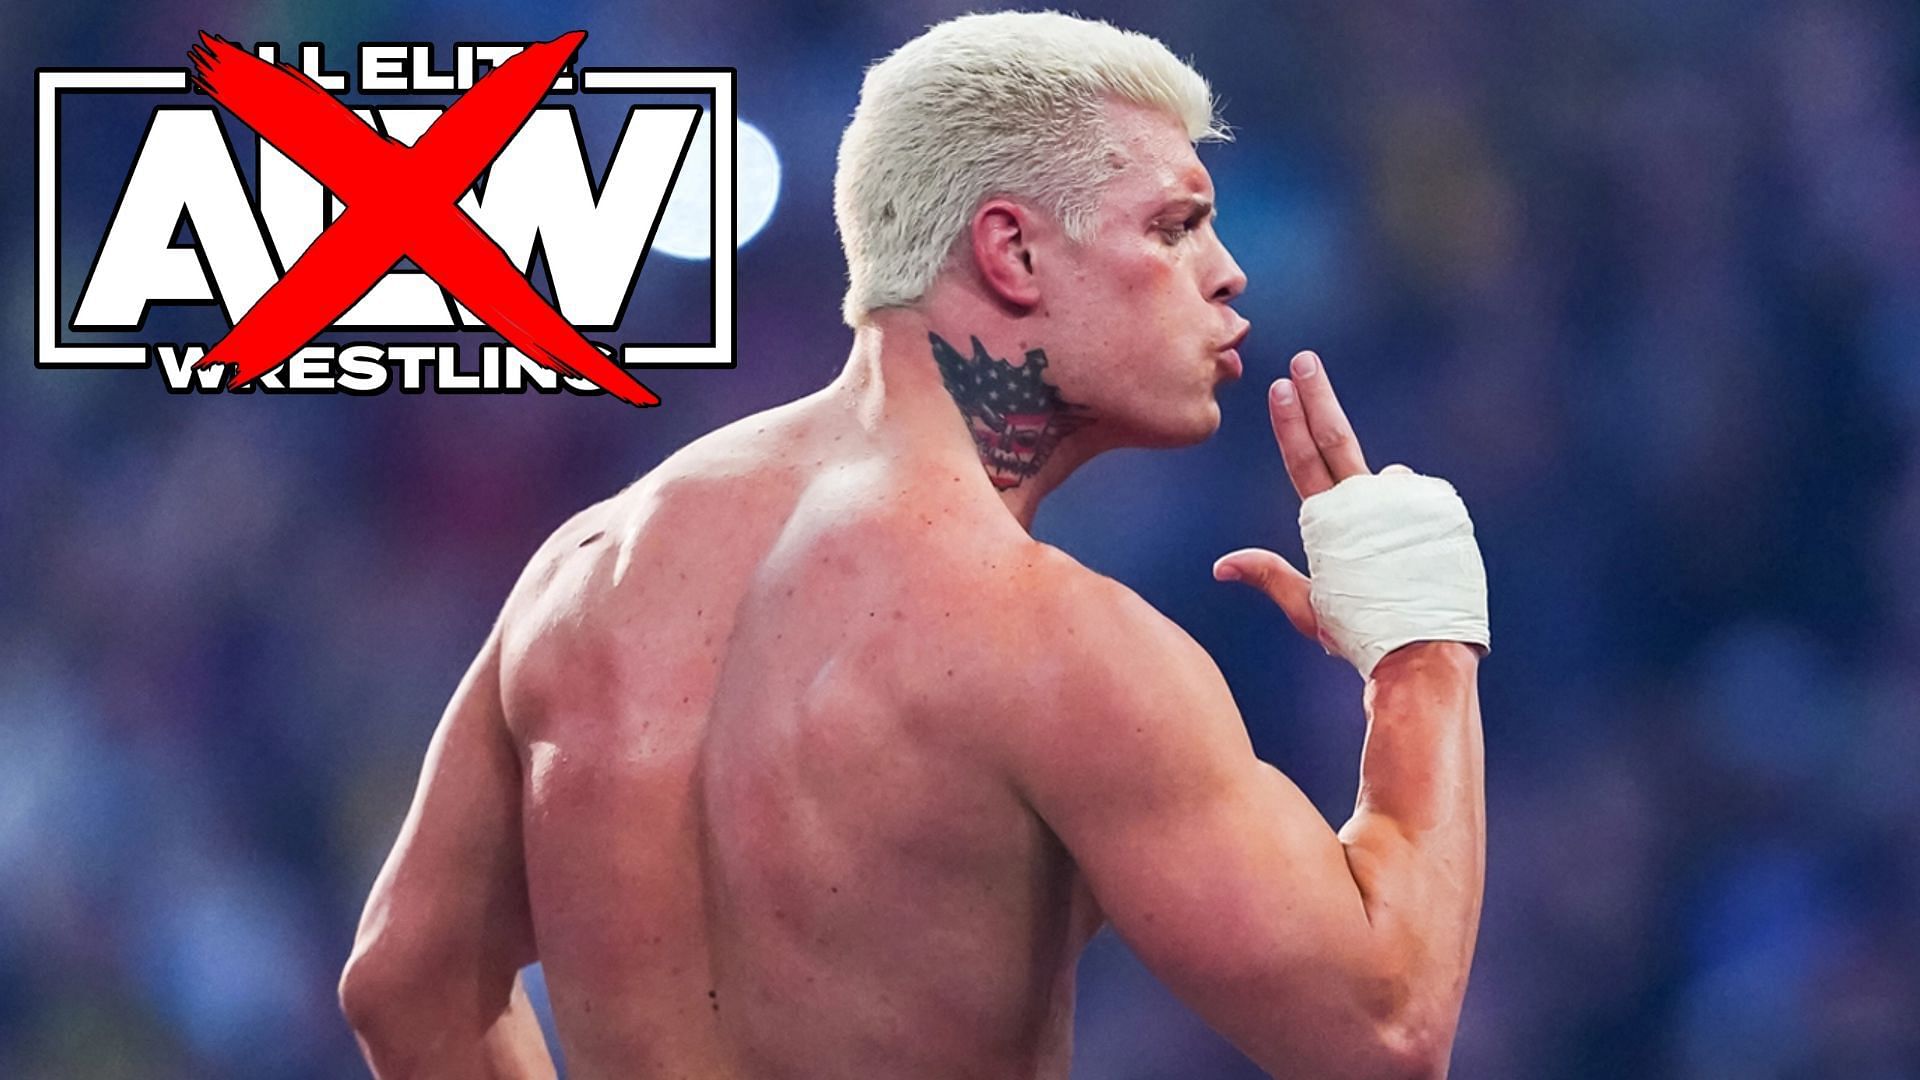 Will Cody Rhodes make history and be the first former AEW star to capture gold in WWE?